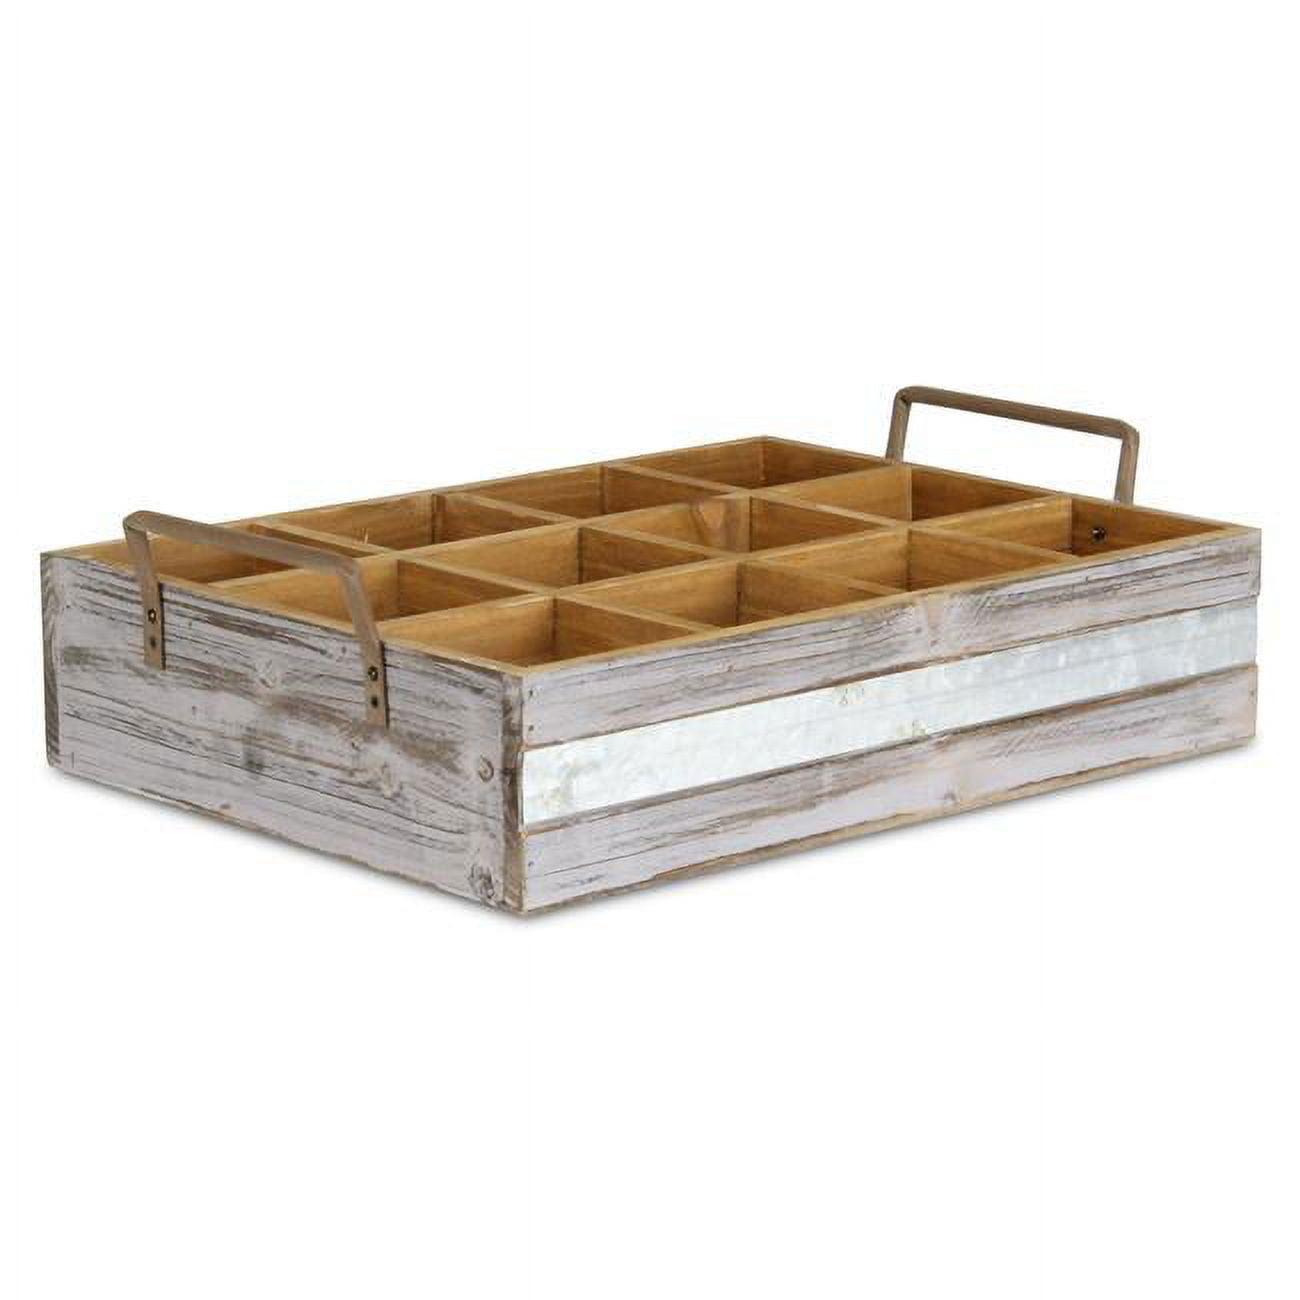 4938gw Wooden 12 Compartment Caddy With Metal Accent & Side Handles